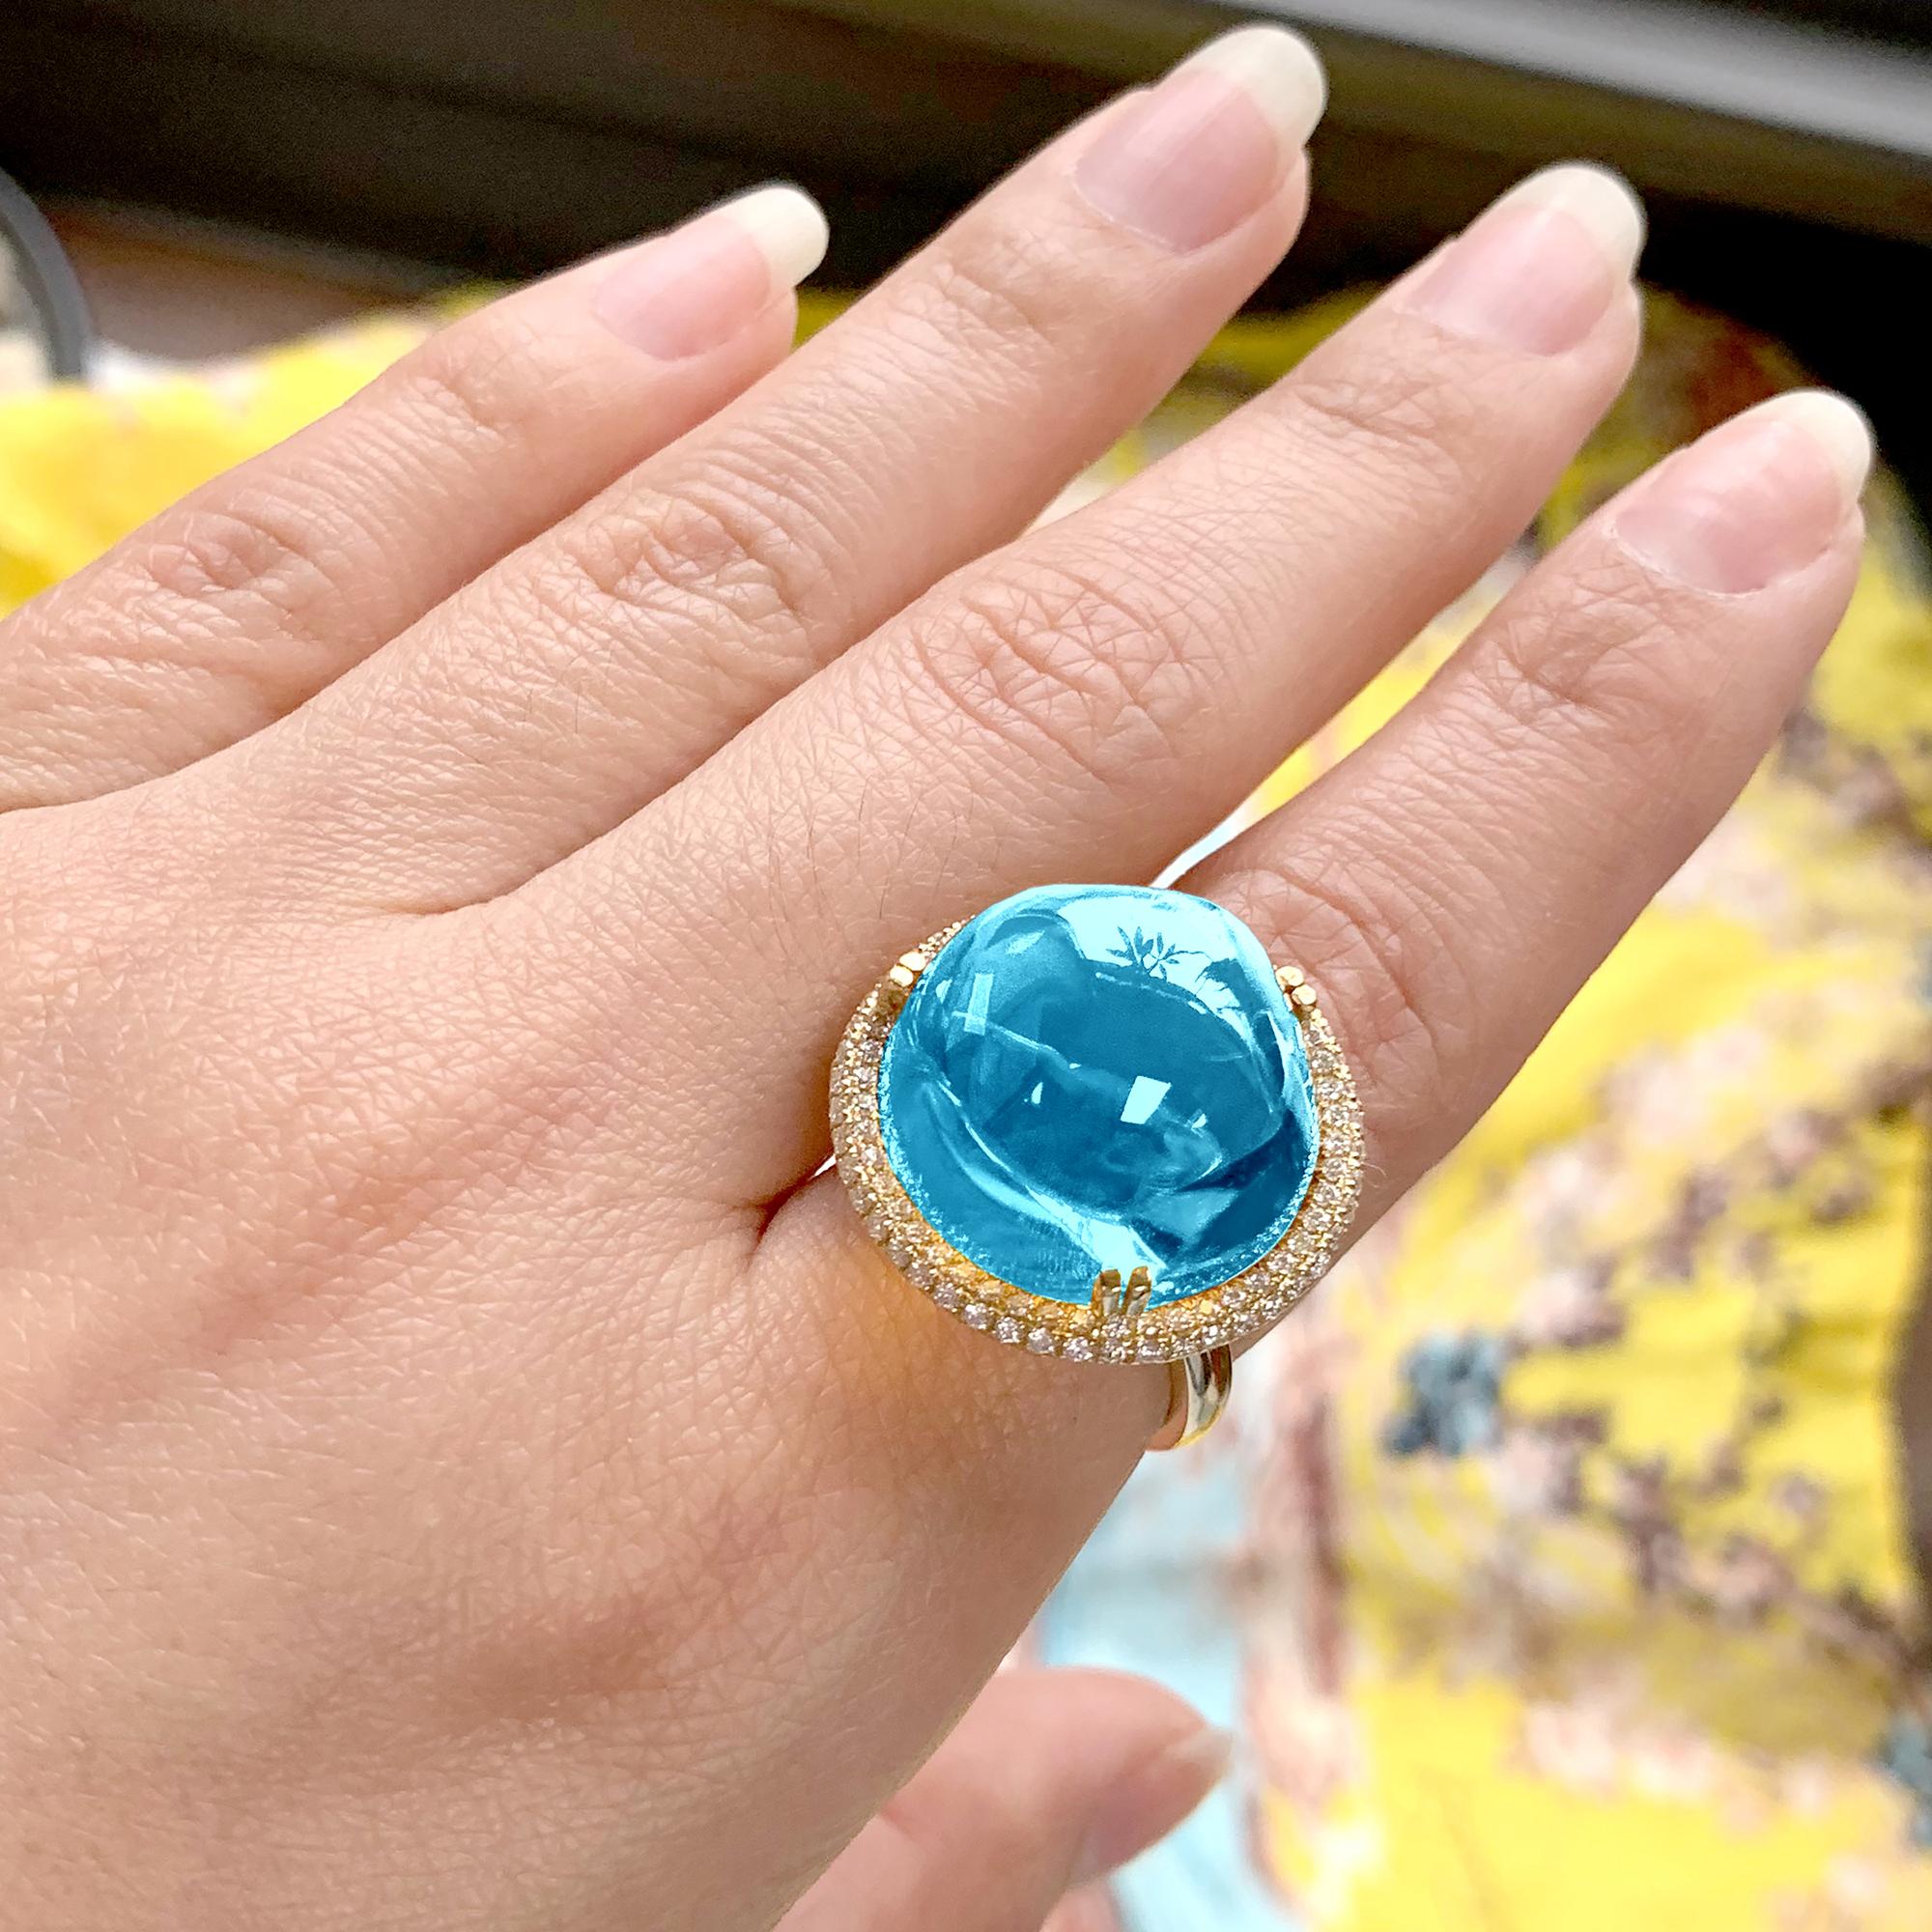 This Blue Topaz Uneven Round Cabochon Ring in 18K Yellow Gold with Diamonds is a stunning piece of jewelry from the 'Rock 'N Roll' Collection. The ring features a beautiful, unevenly-shaped round cabochon blue topaz, set in a sleek 18K yellow gold